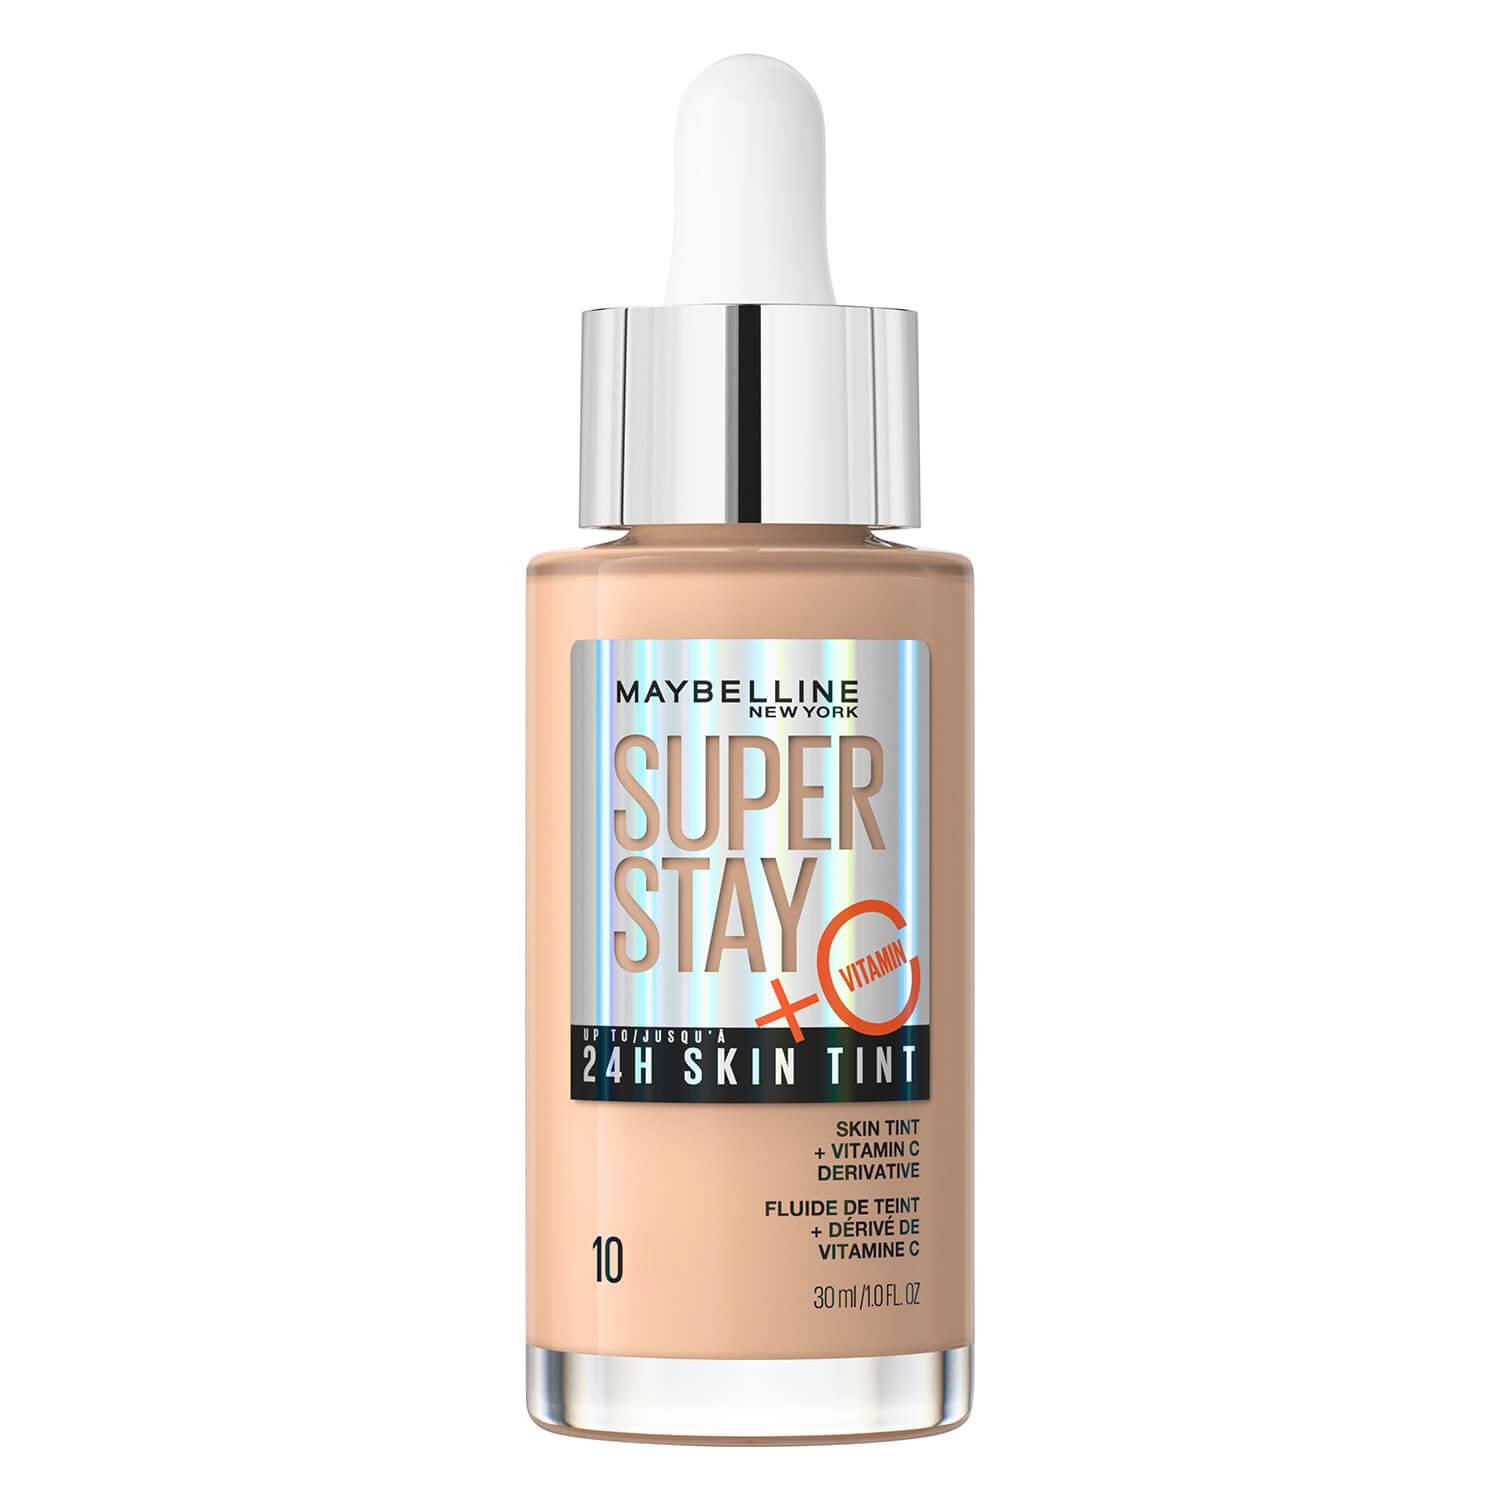 Maybelline NY Teint - Super Stay 24H Skin Tint Ivory 10